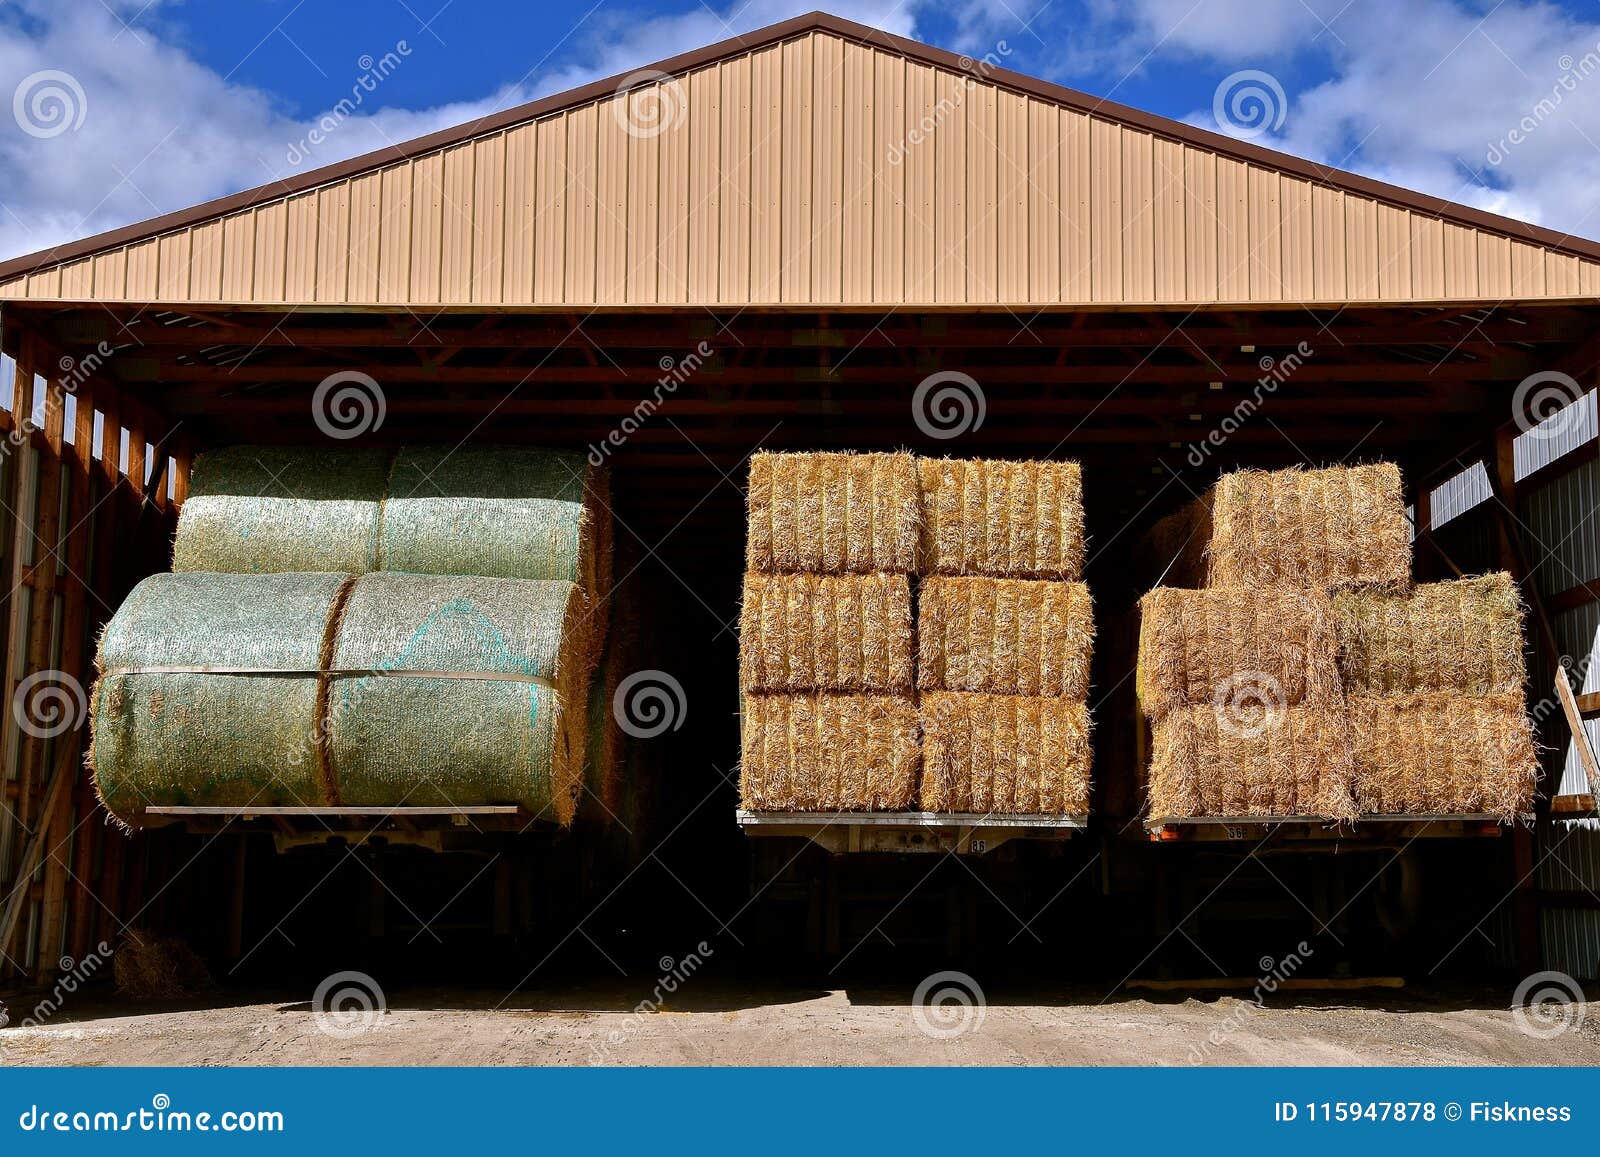 Three Trailers Of Large Hay Bales Stock Photo - Image of 